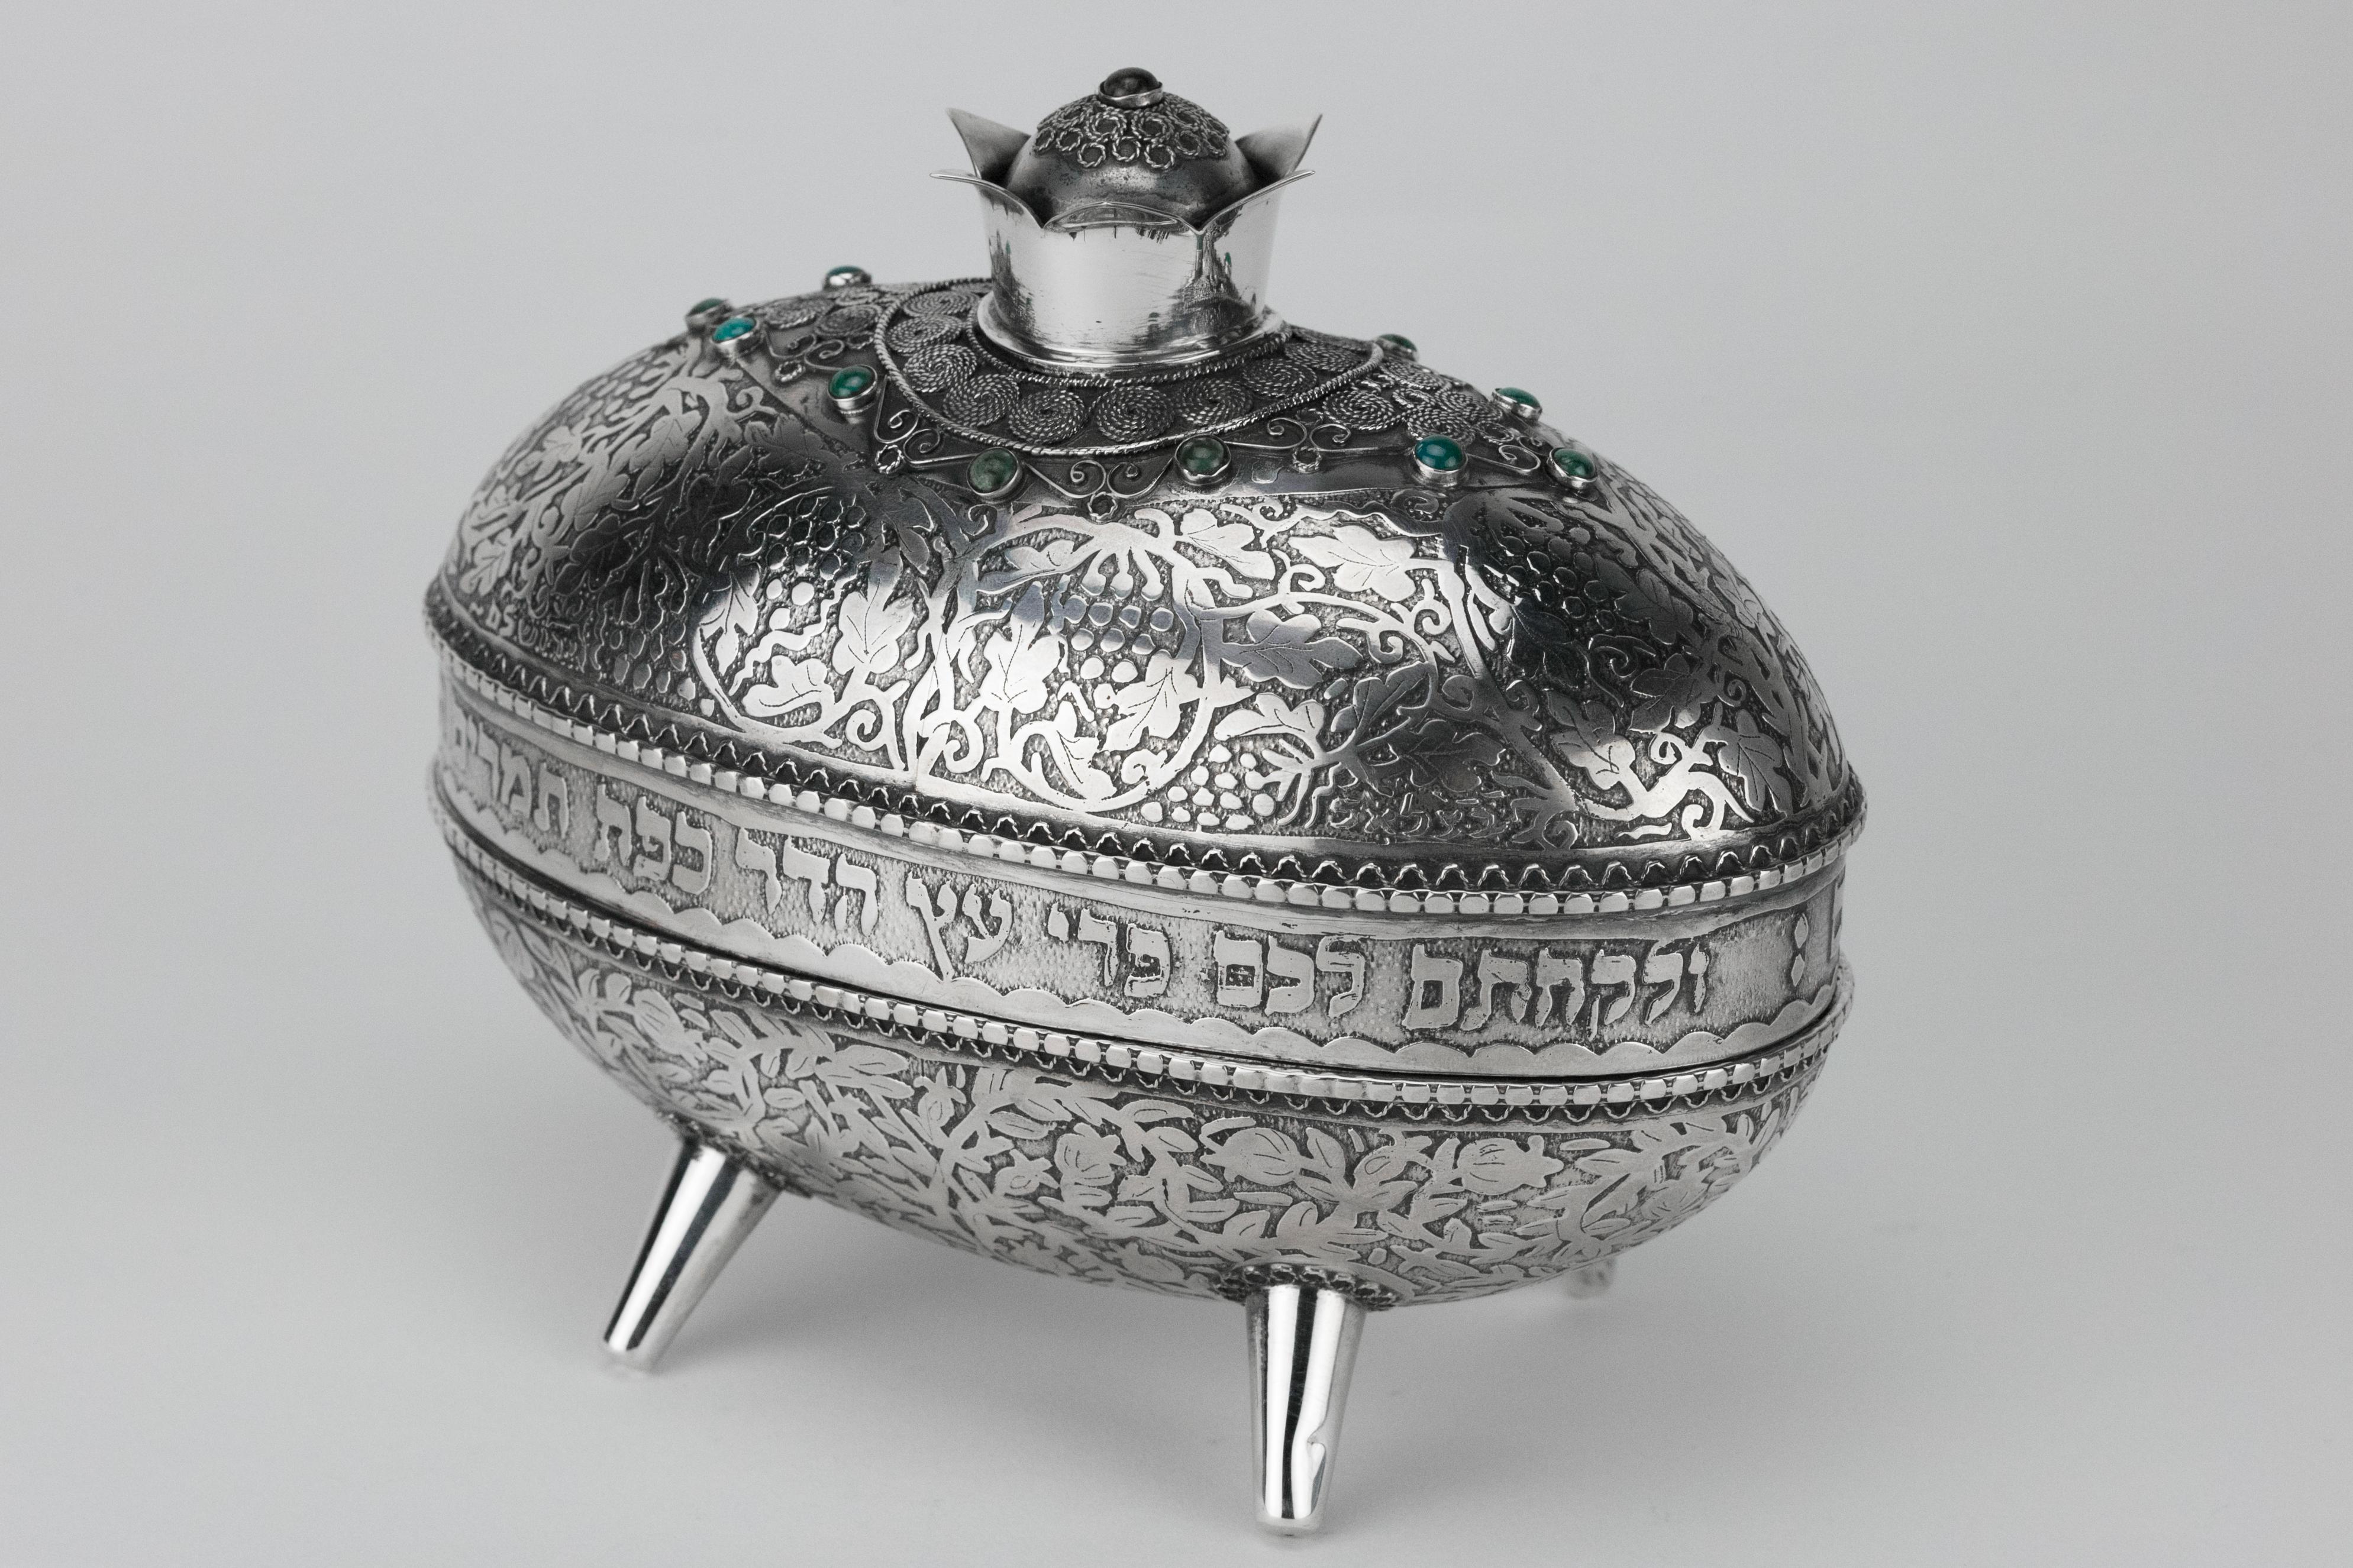 Silver and silver filigree etrog container, by Yehia Yemini, Bezalel School, Jerusalem, circa 1920.
Acid-etched decoration with grapes and vines on the lid, and with pomegranates and leaves on the base, decorated with silver filigree on the lid,